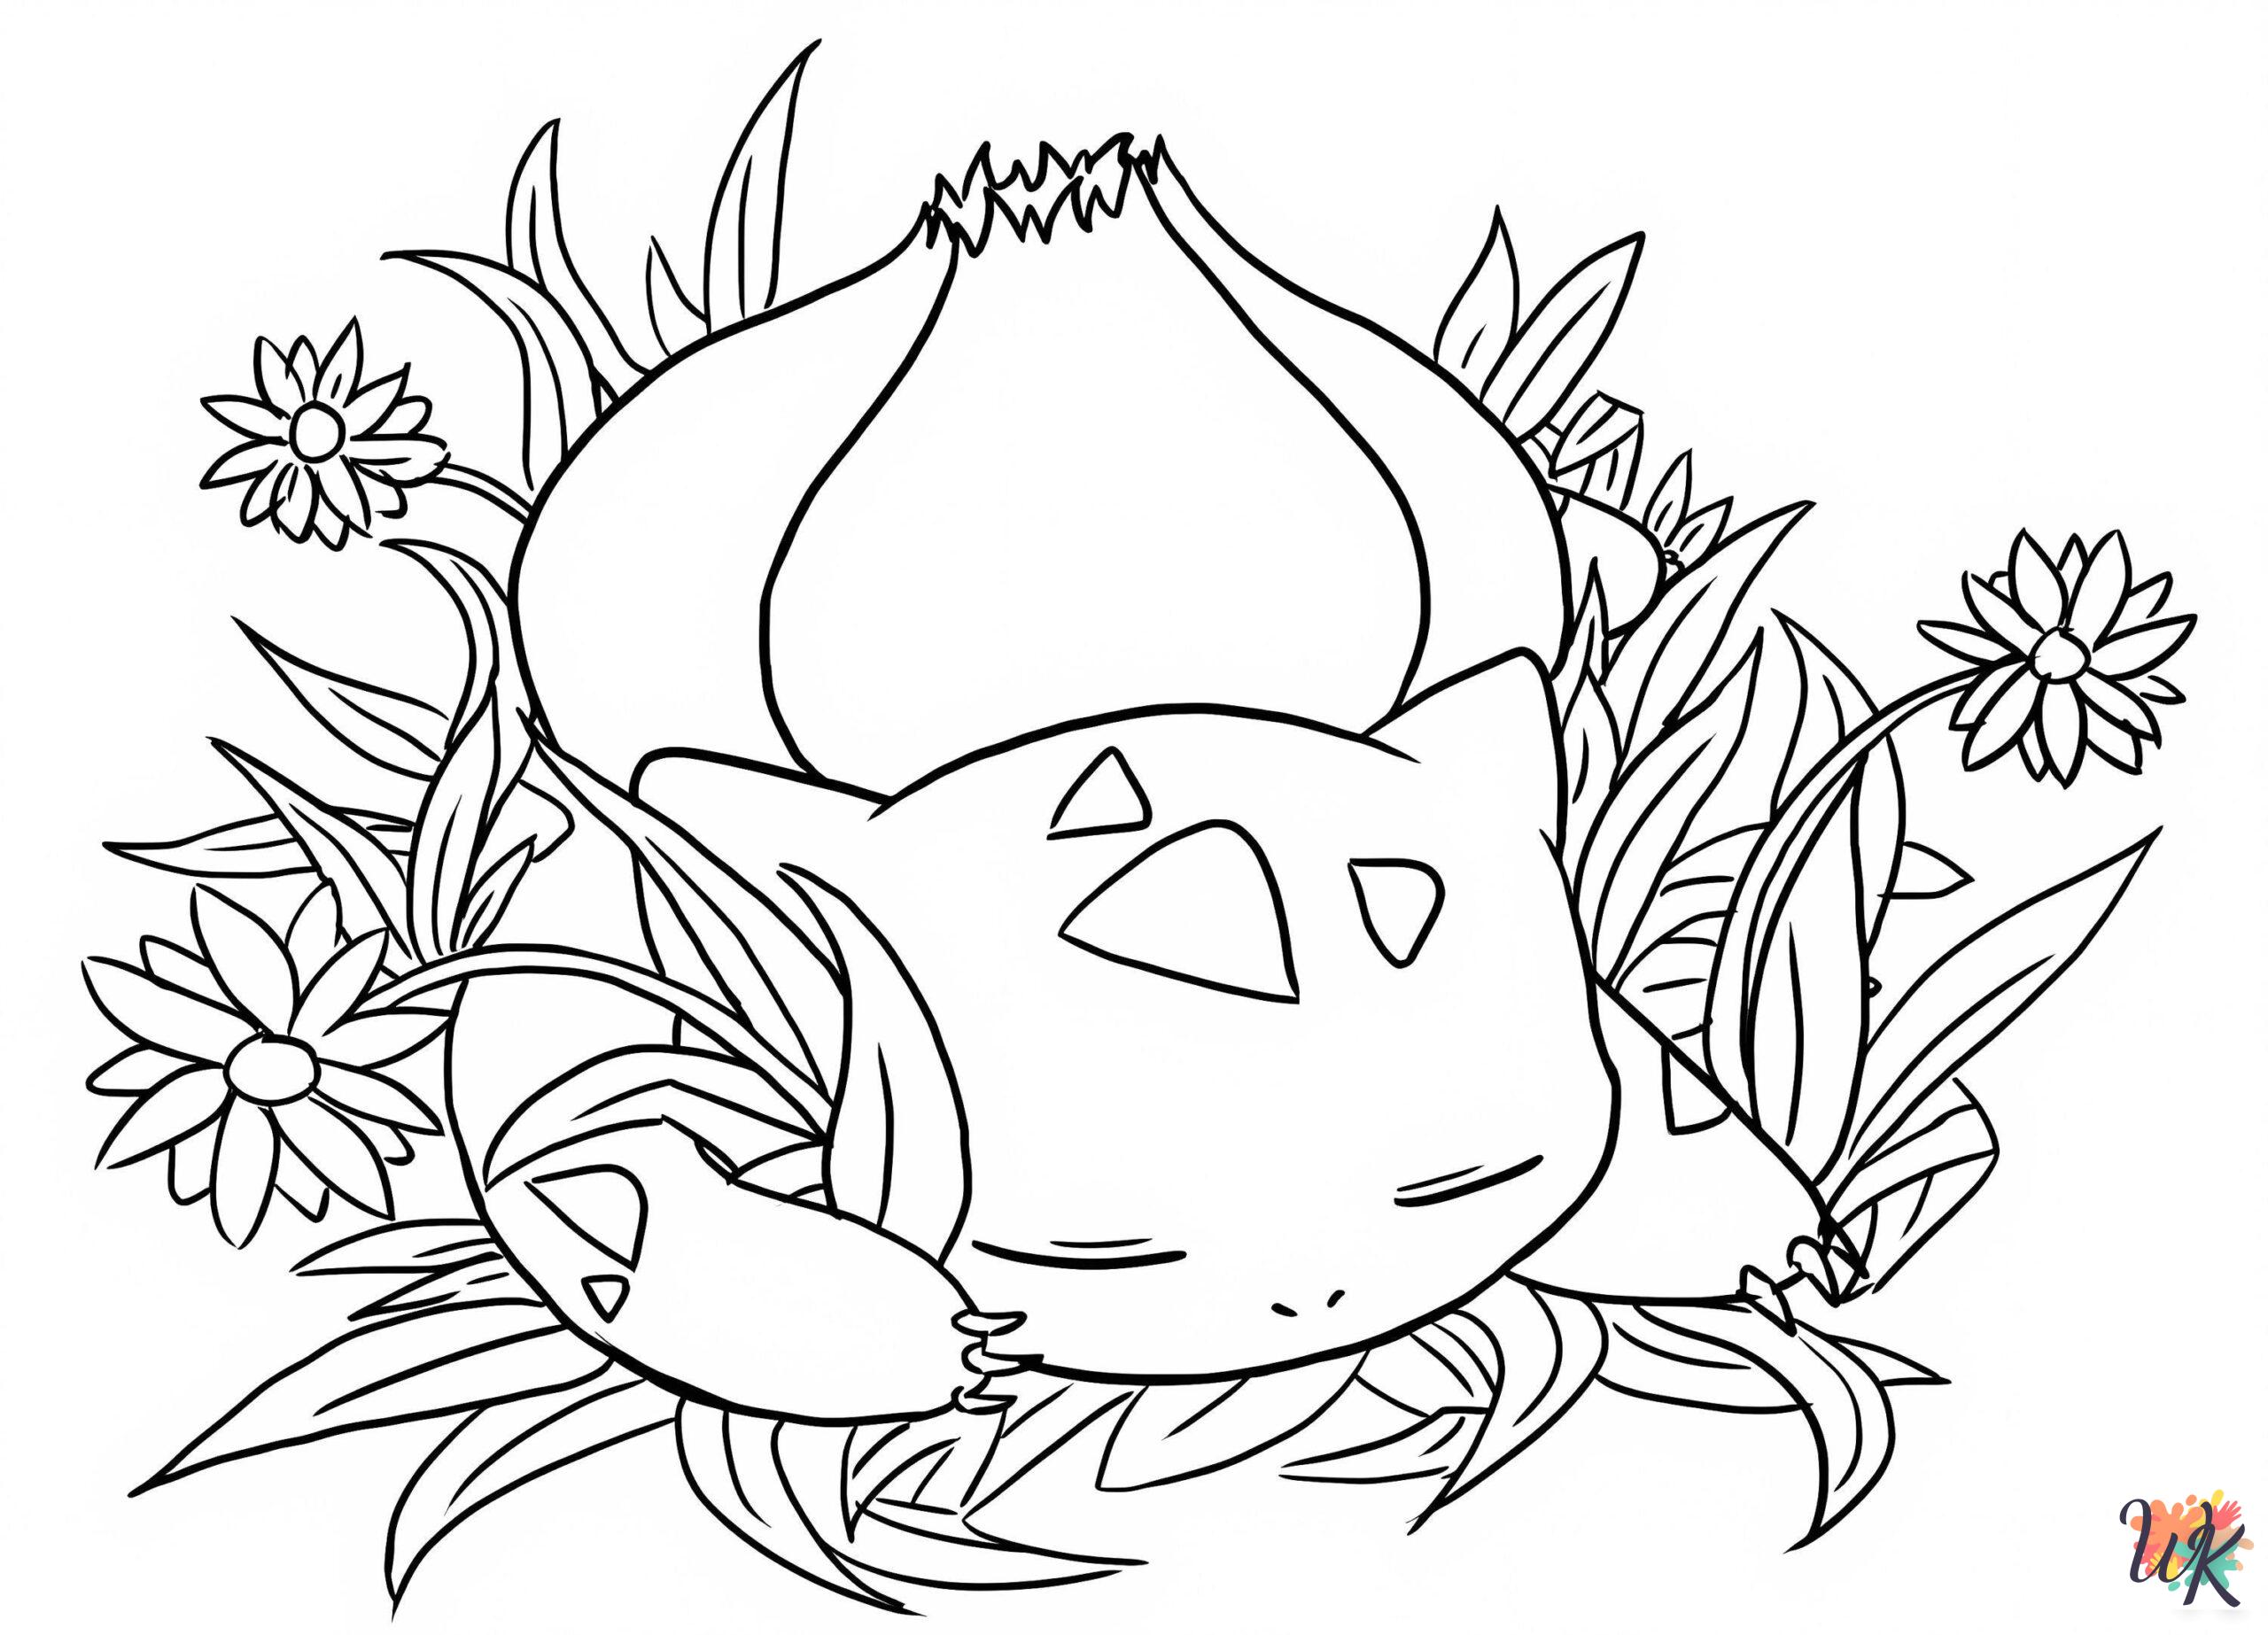 Bulbasaur coloring pages for kids